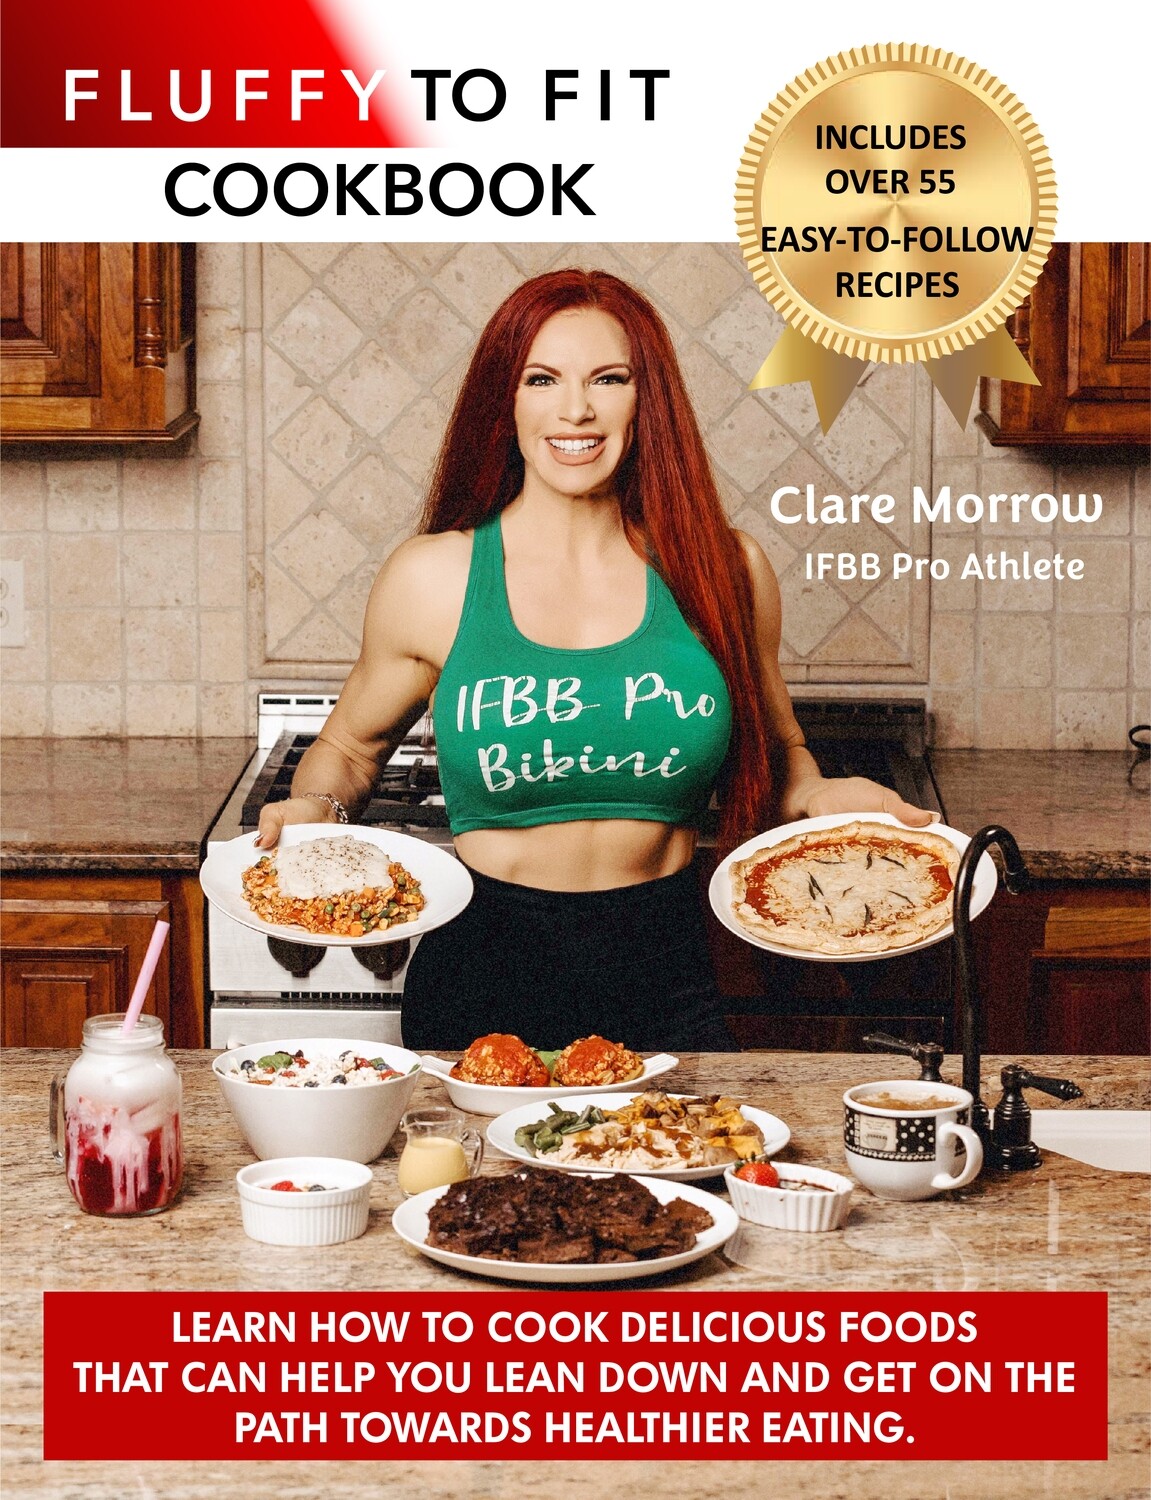 *NEW* Fluffy to Fit Cookbook e book format